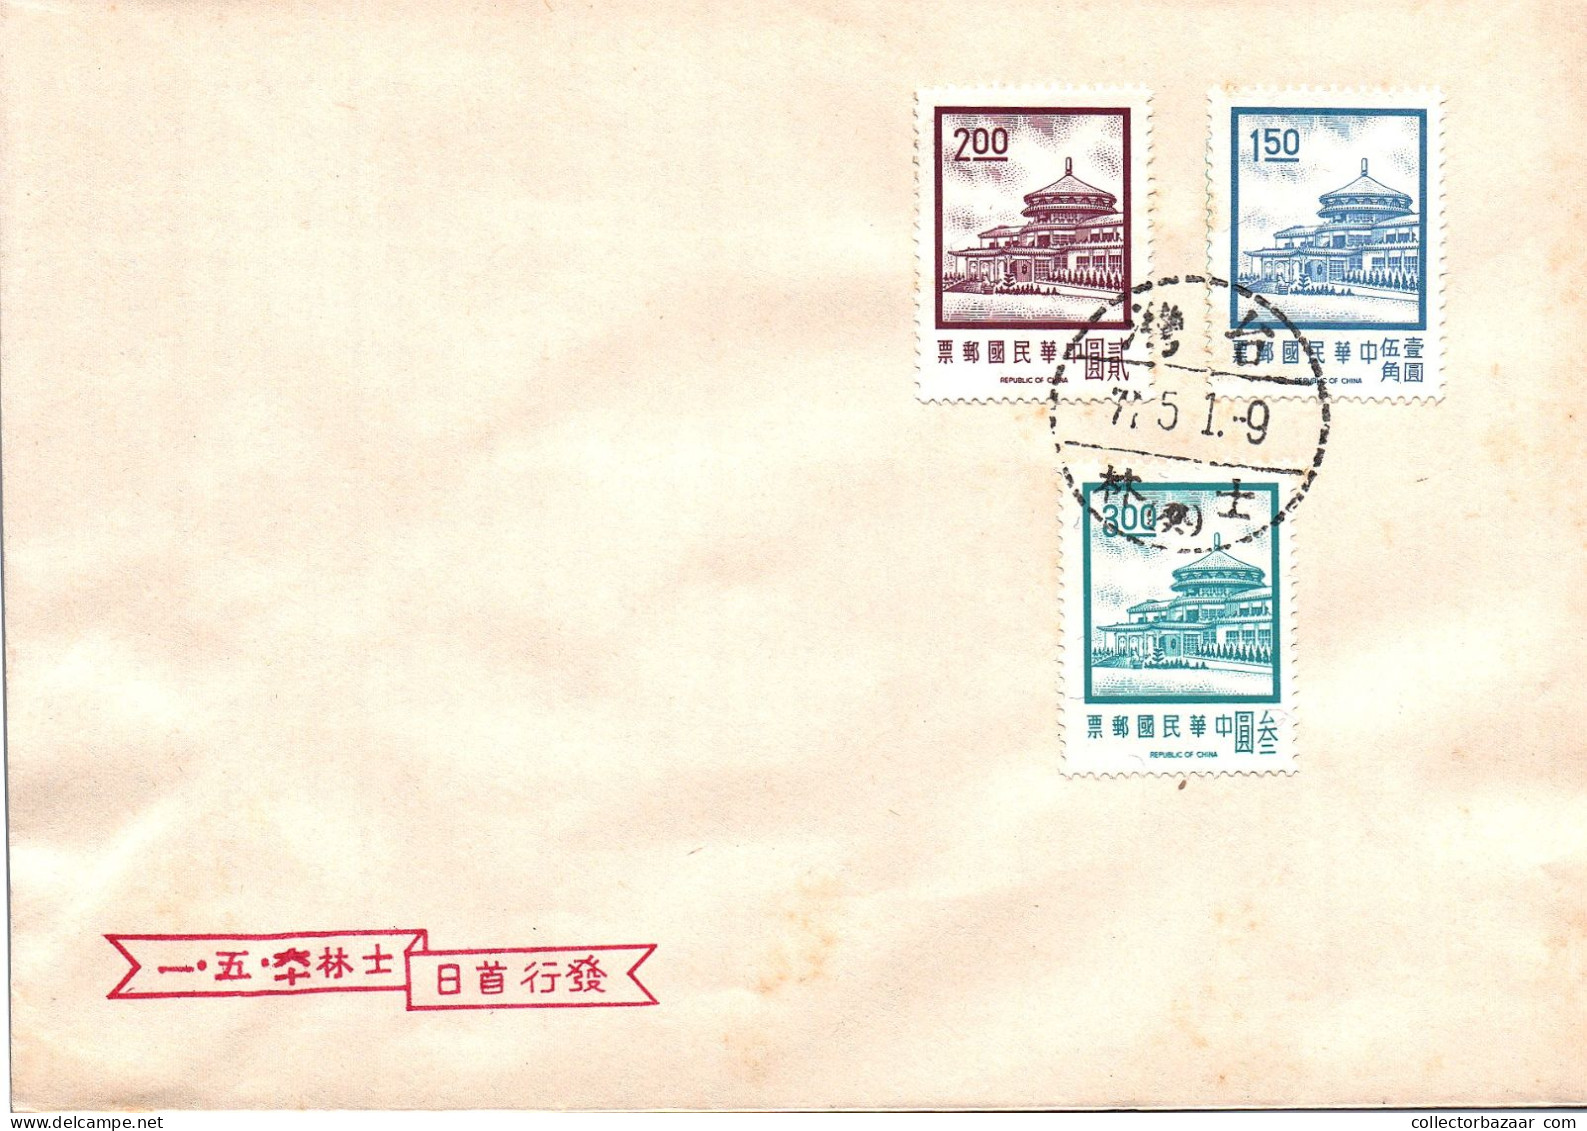 Taiwan Formosa Republic Of China FDC Sun Yat-Sen Chungshan Building Yangmingshan Architecure 3$ 2$ And 1.50$ Stamps - FDC